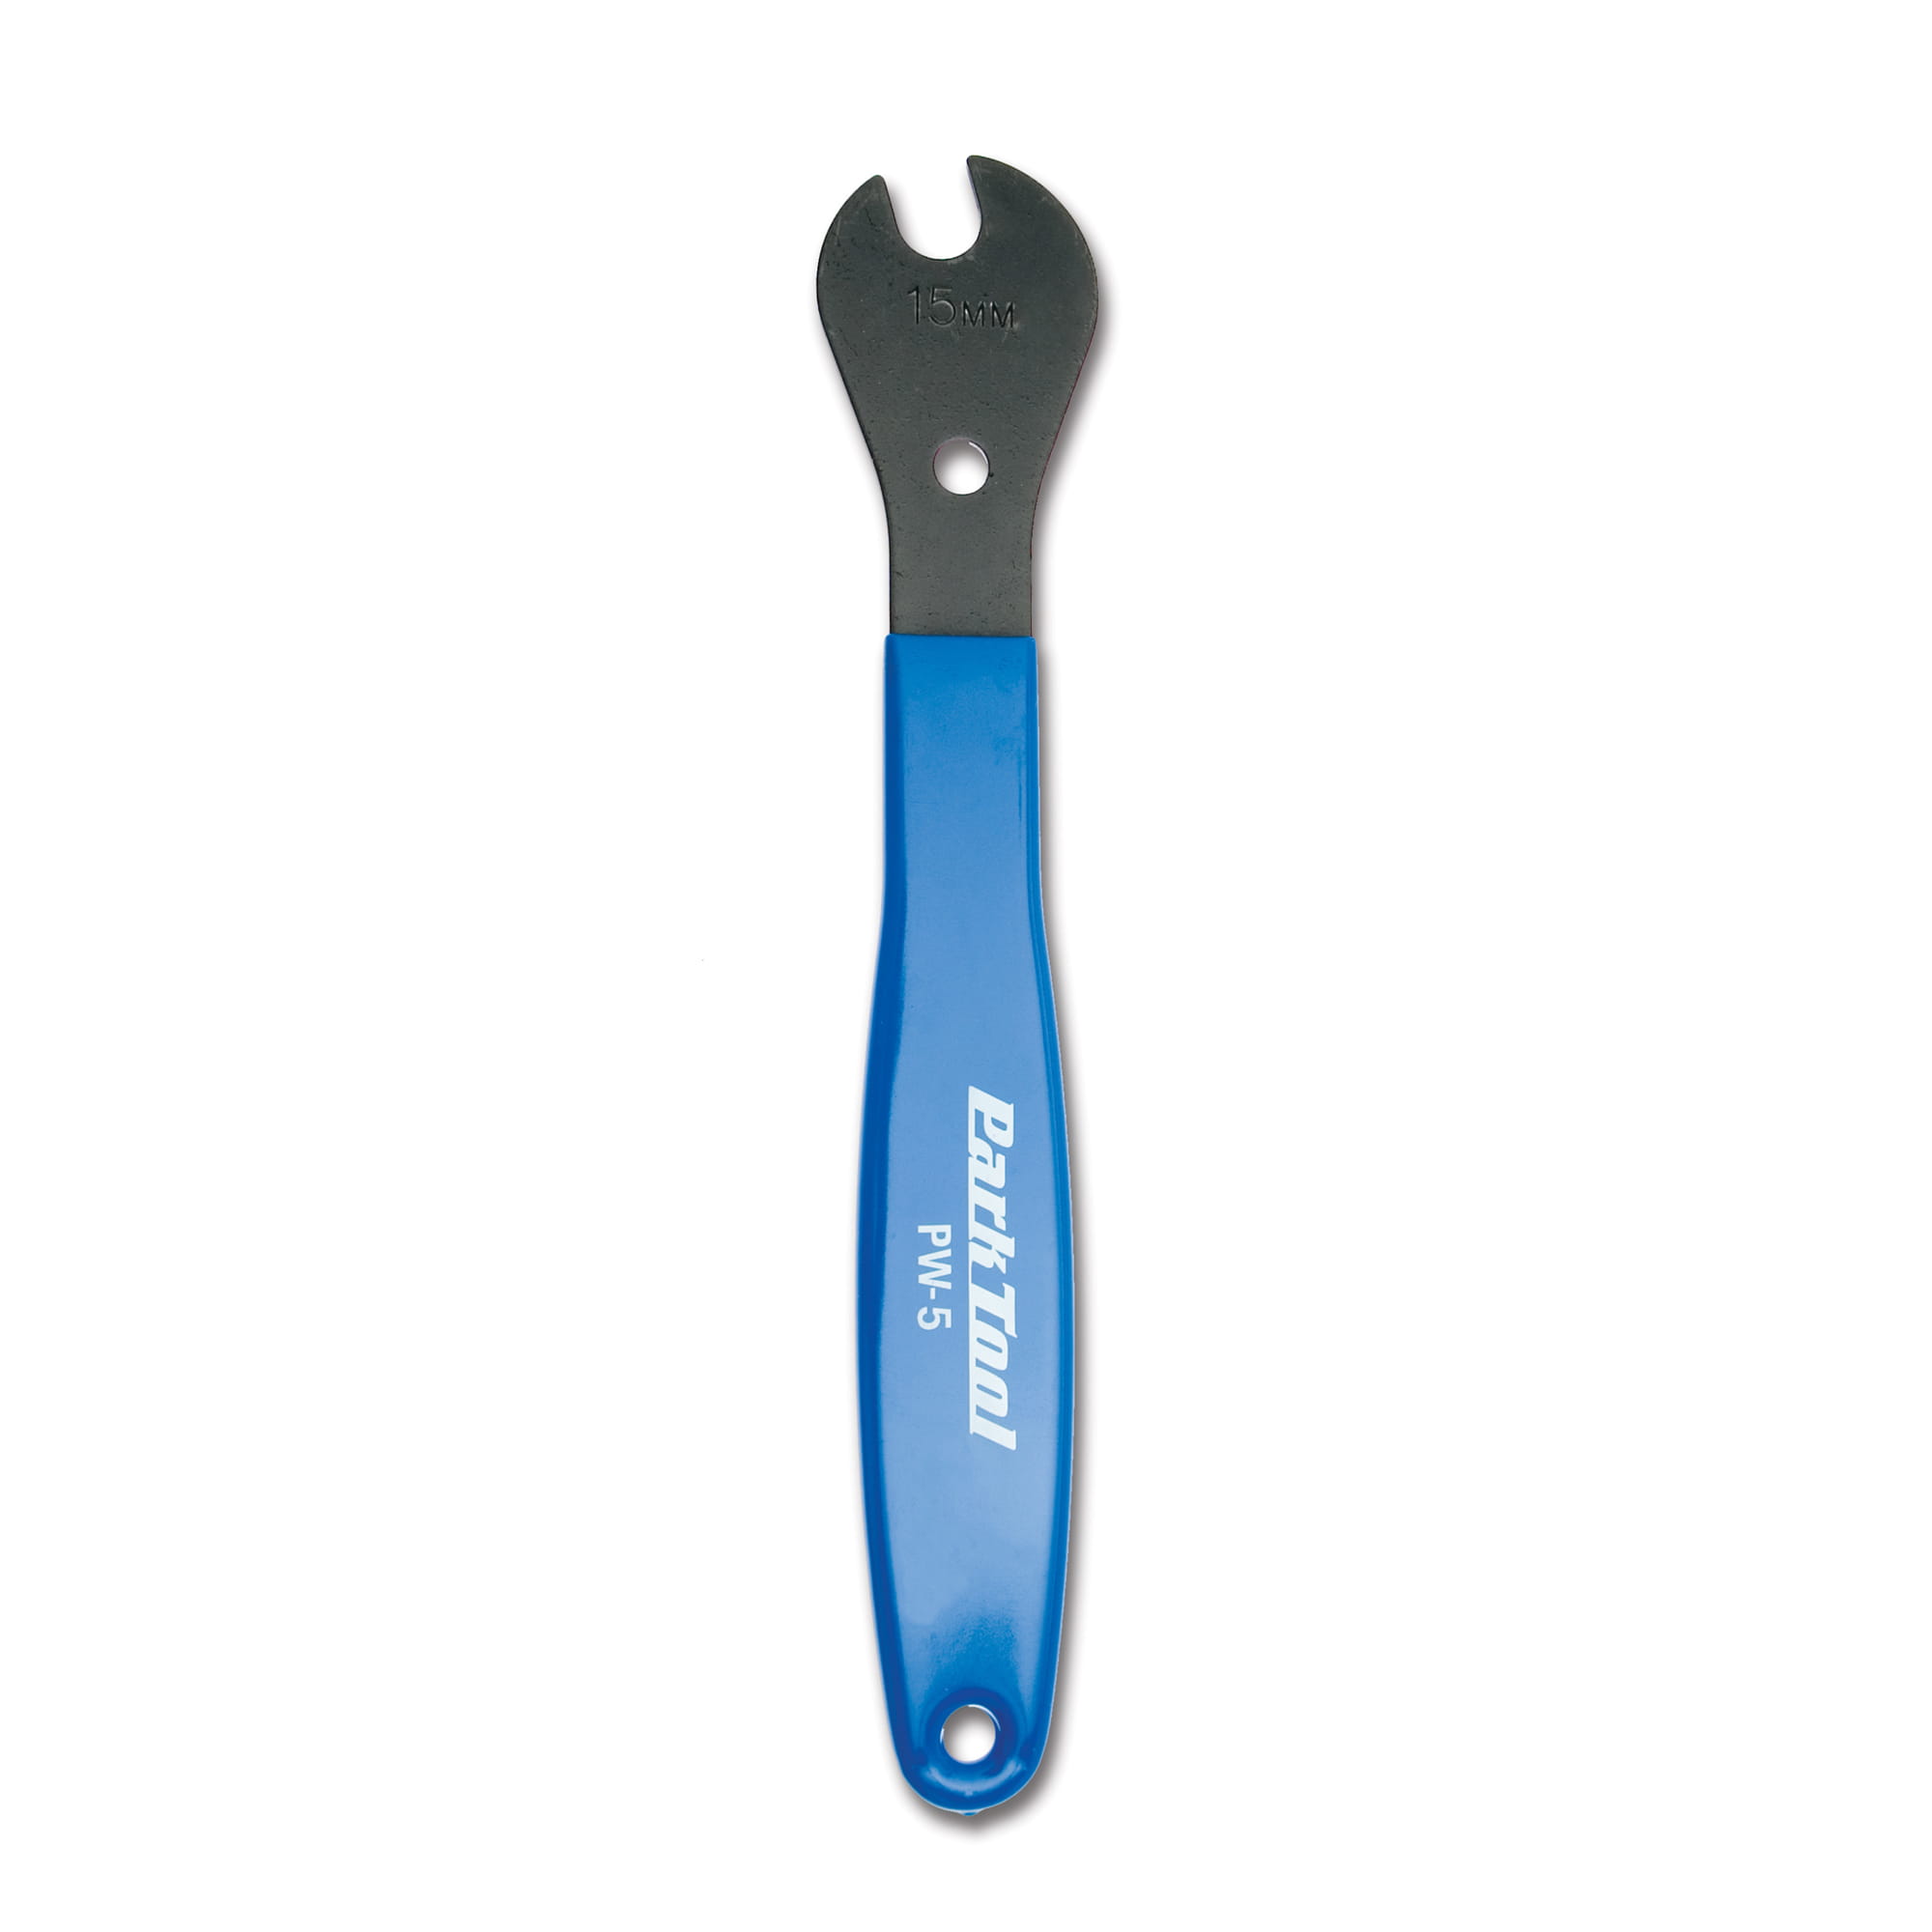 Park Tool SCW-15 15 mm blue/grey Shop Cone Wrench 